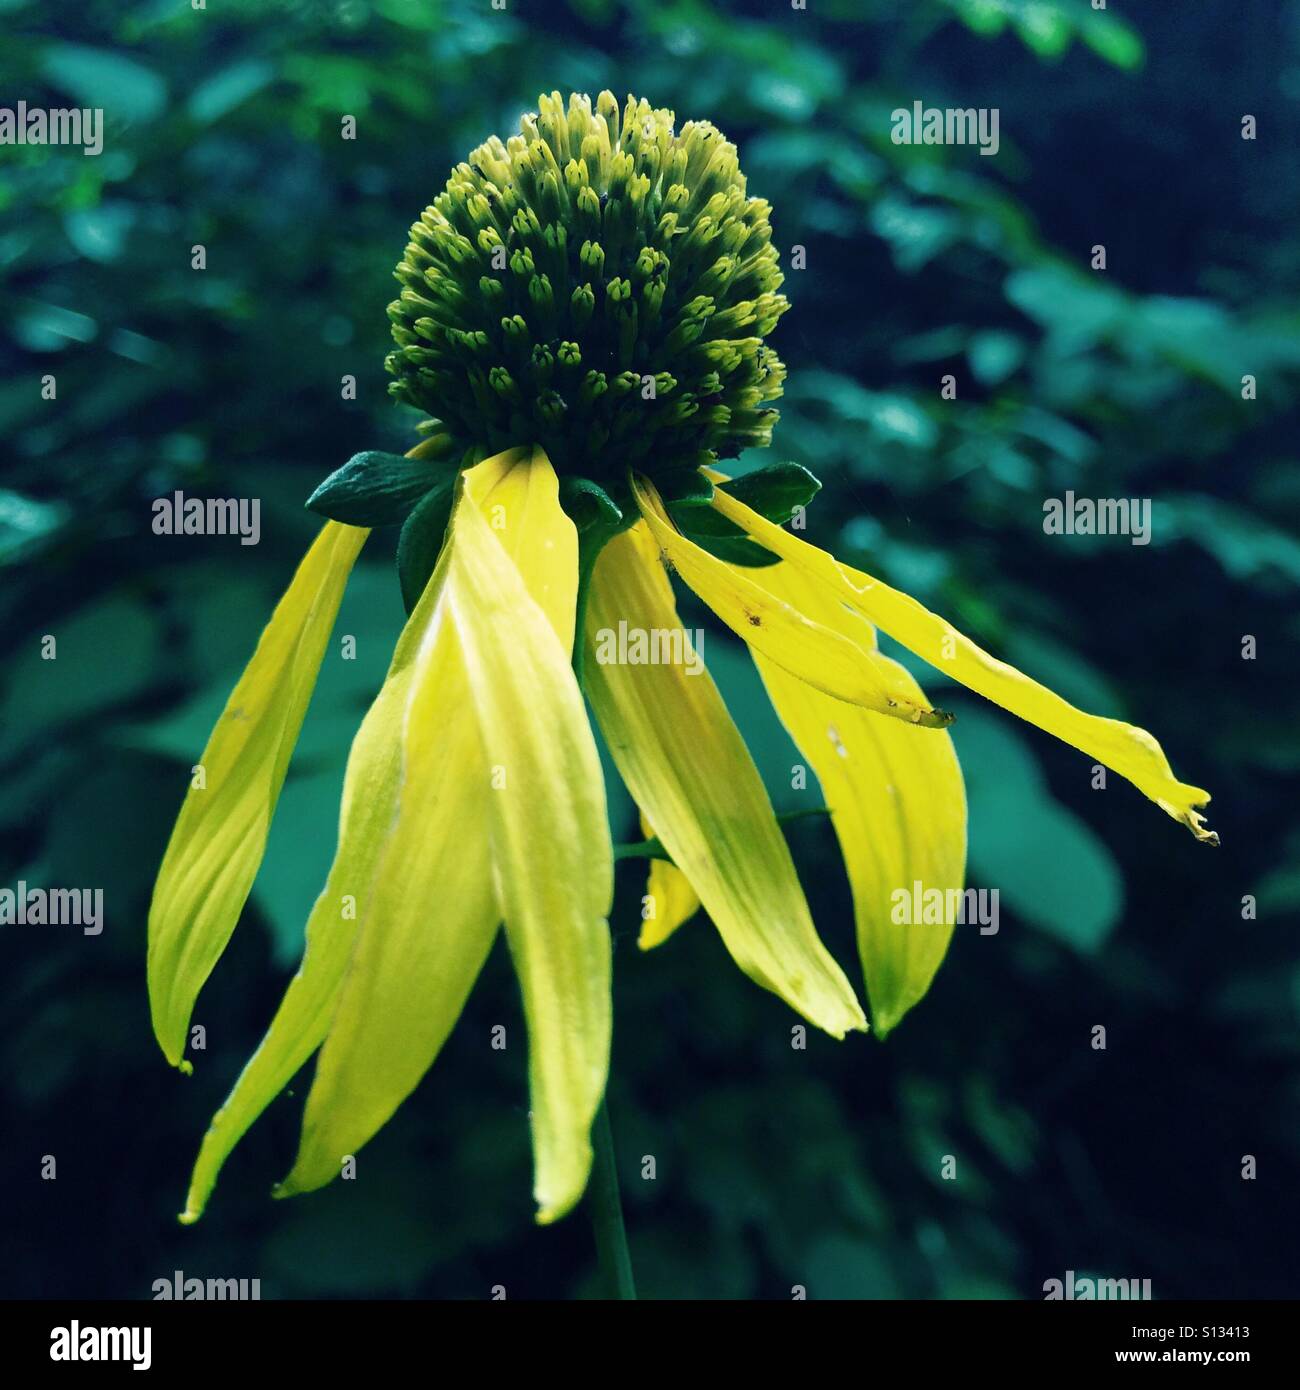 Wildflower in the woods. The wildflower is a Cutleaf Coneflower. It is also known as a Green-headed Coneflower and a Golden Glow. The Latin name is Rudbeckia laciniata. Stock Photo